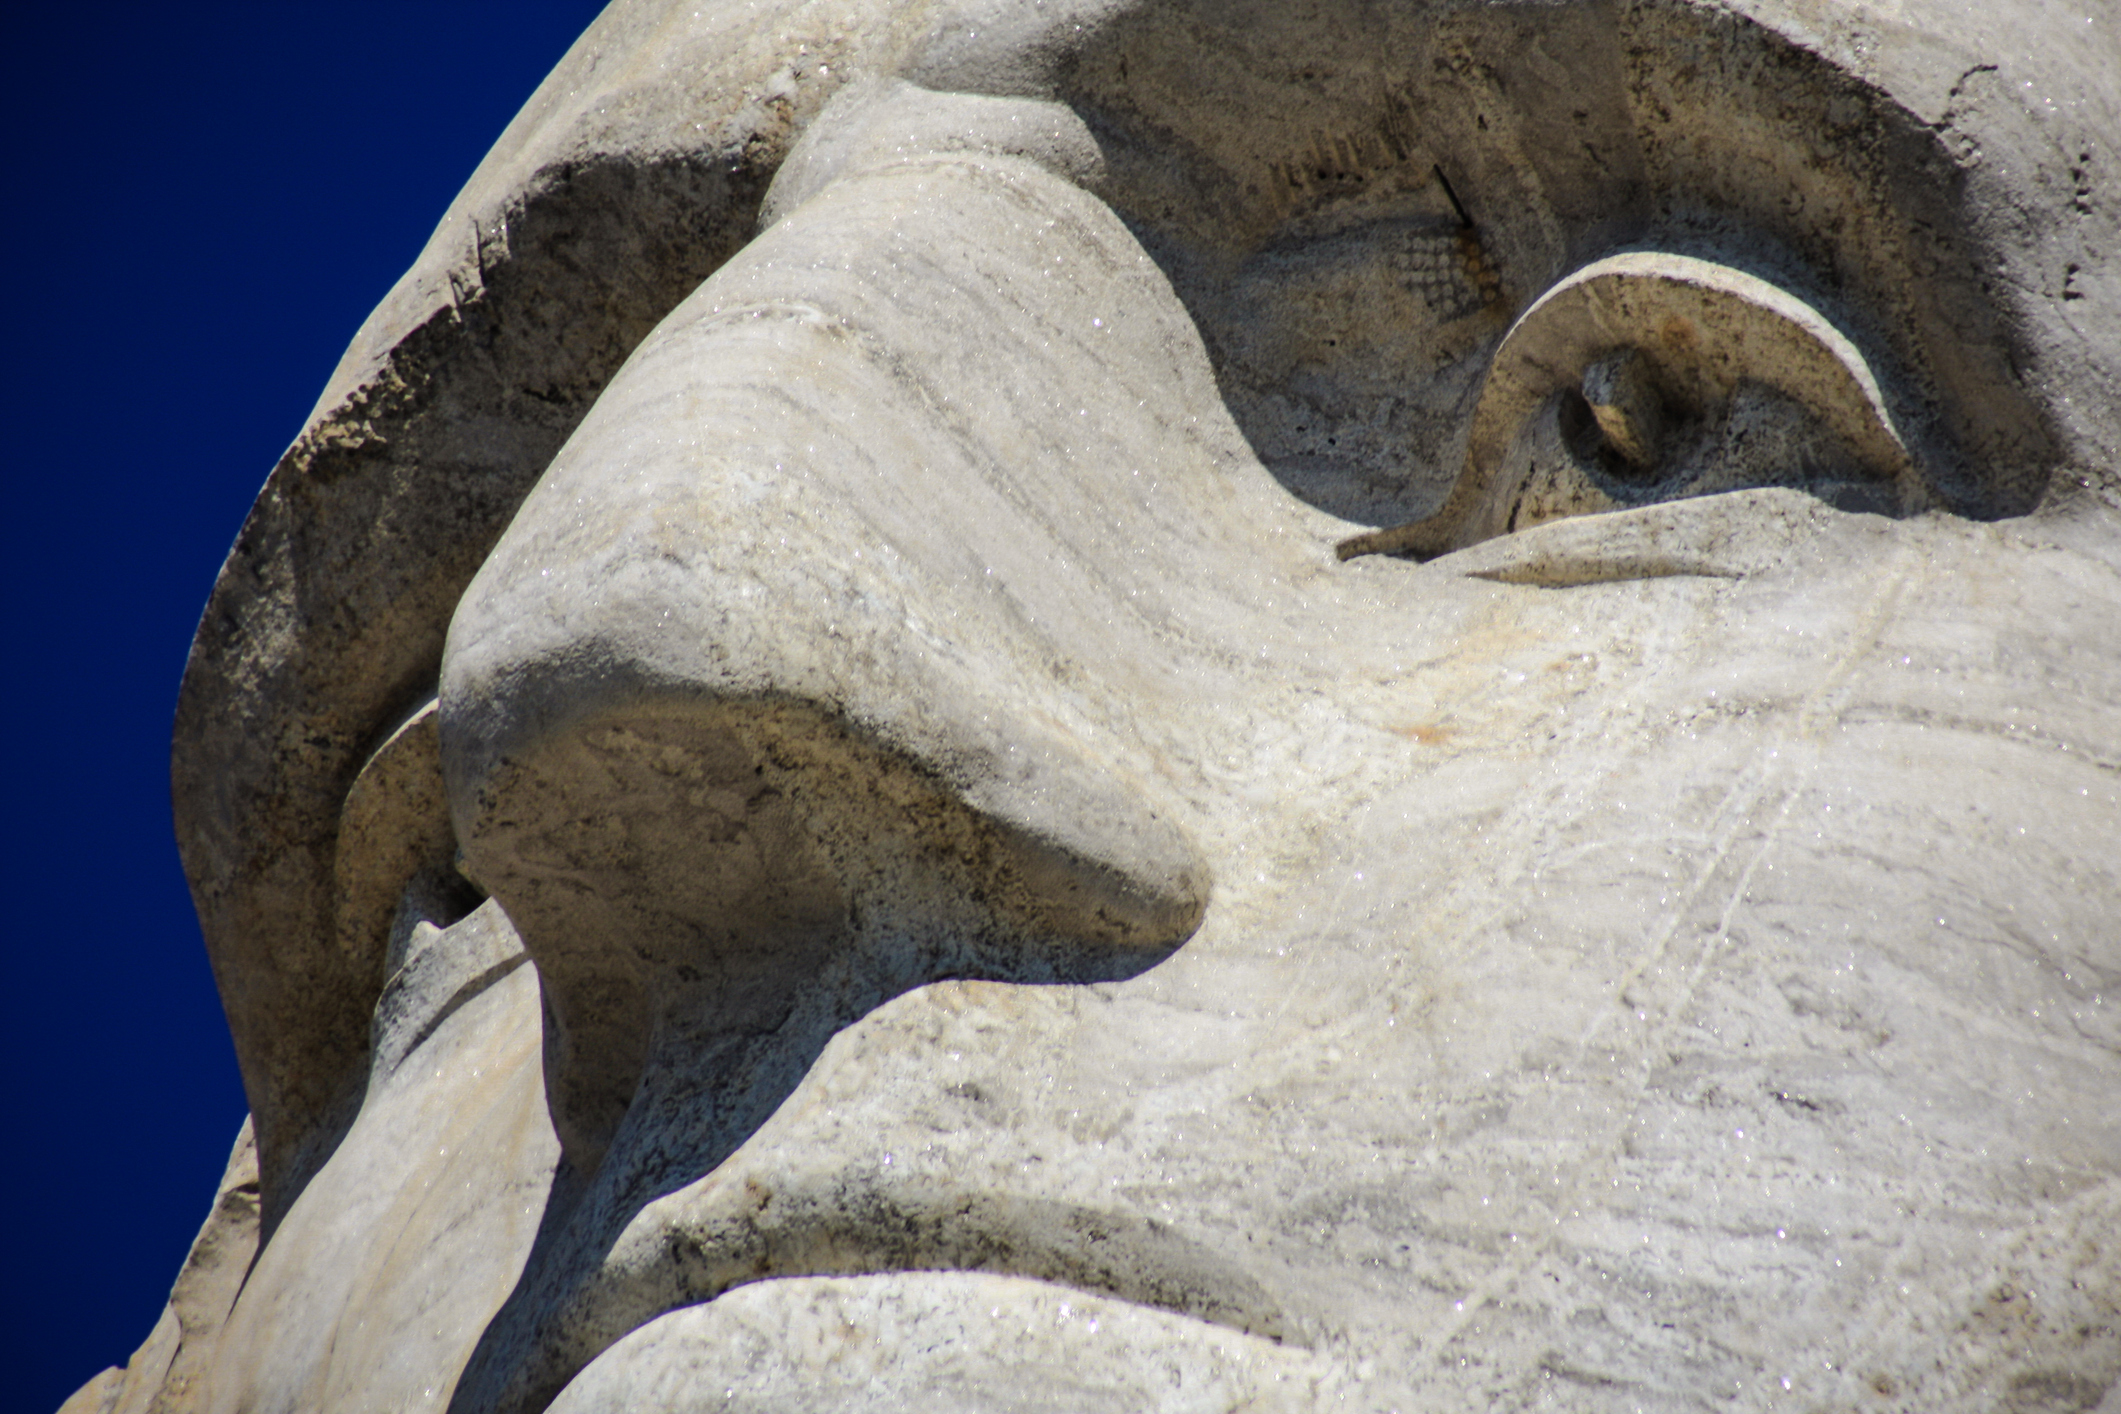 A closeup of a stone face of a president.